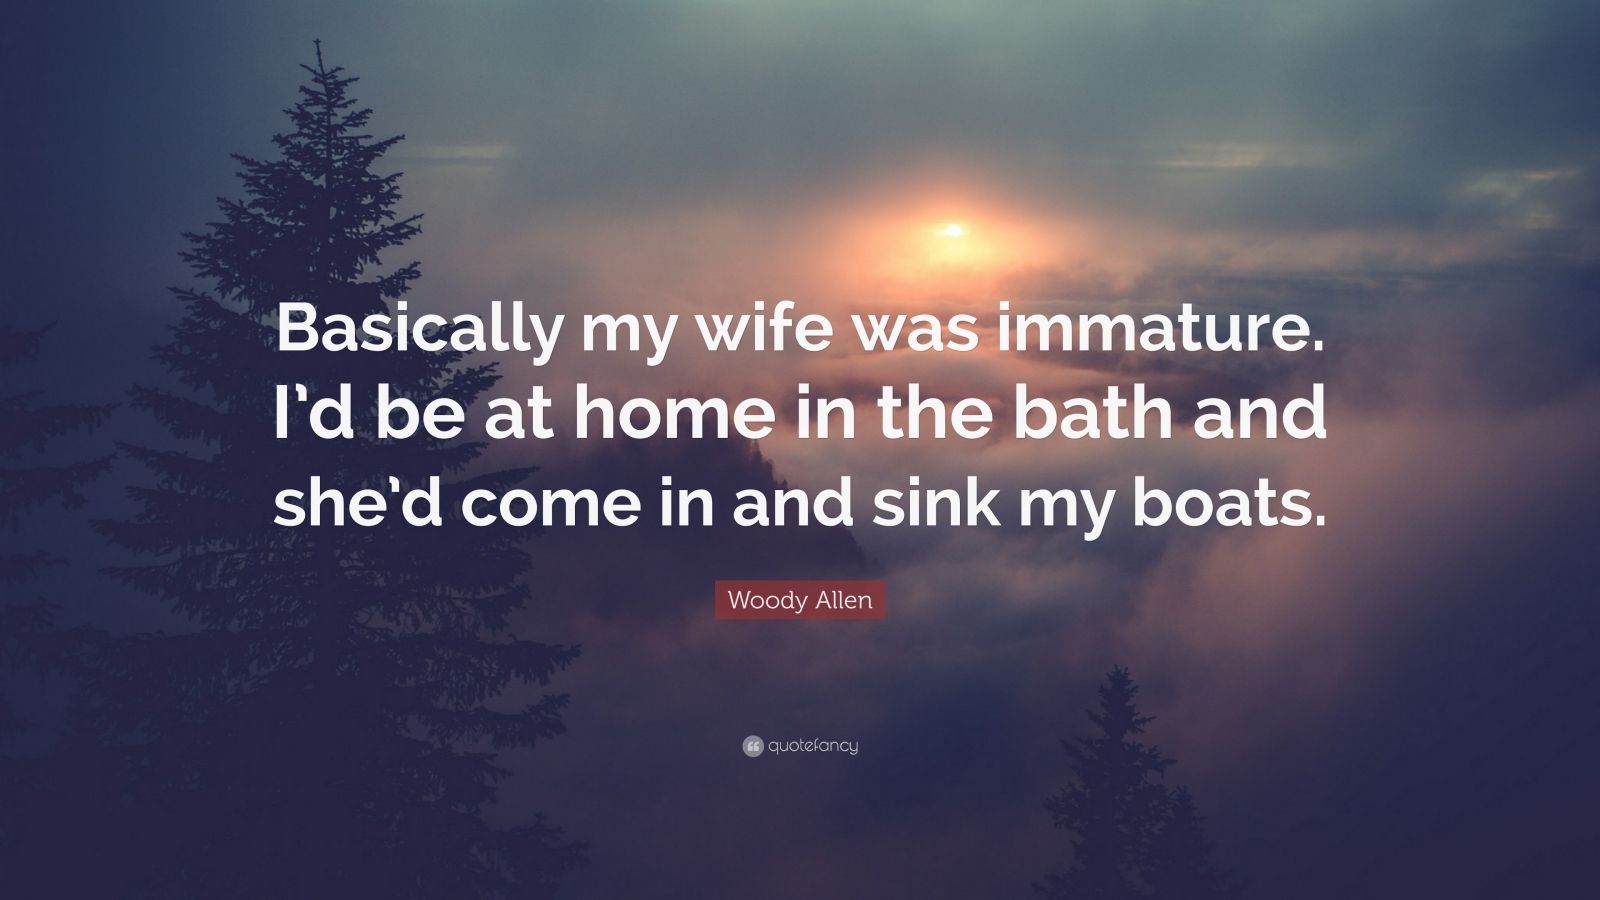 Woody Allen Quote: "Basically my wife was immature. I'd be at home in the bath and she'd come in ...